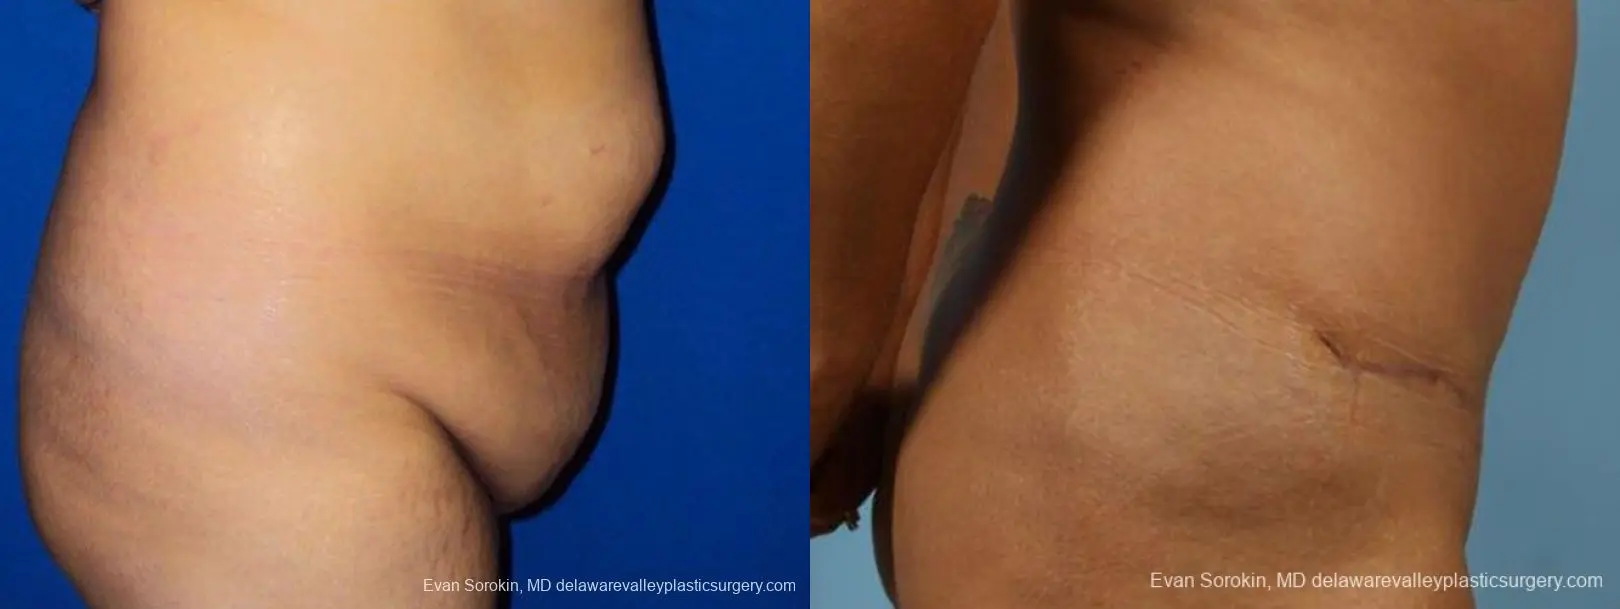 Philadelphia Abdominoplasty 9471 - Before and After 3